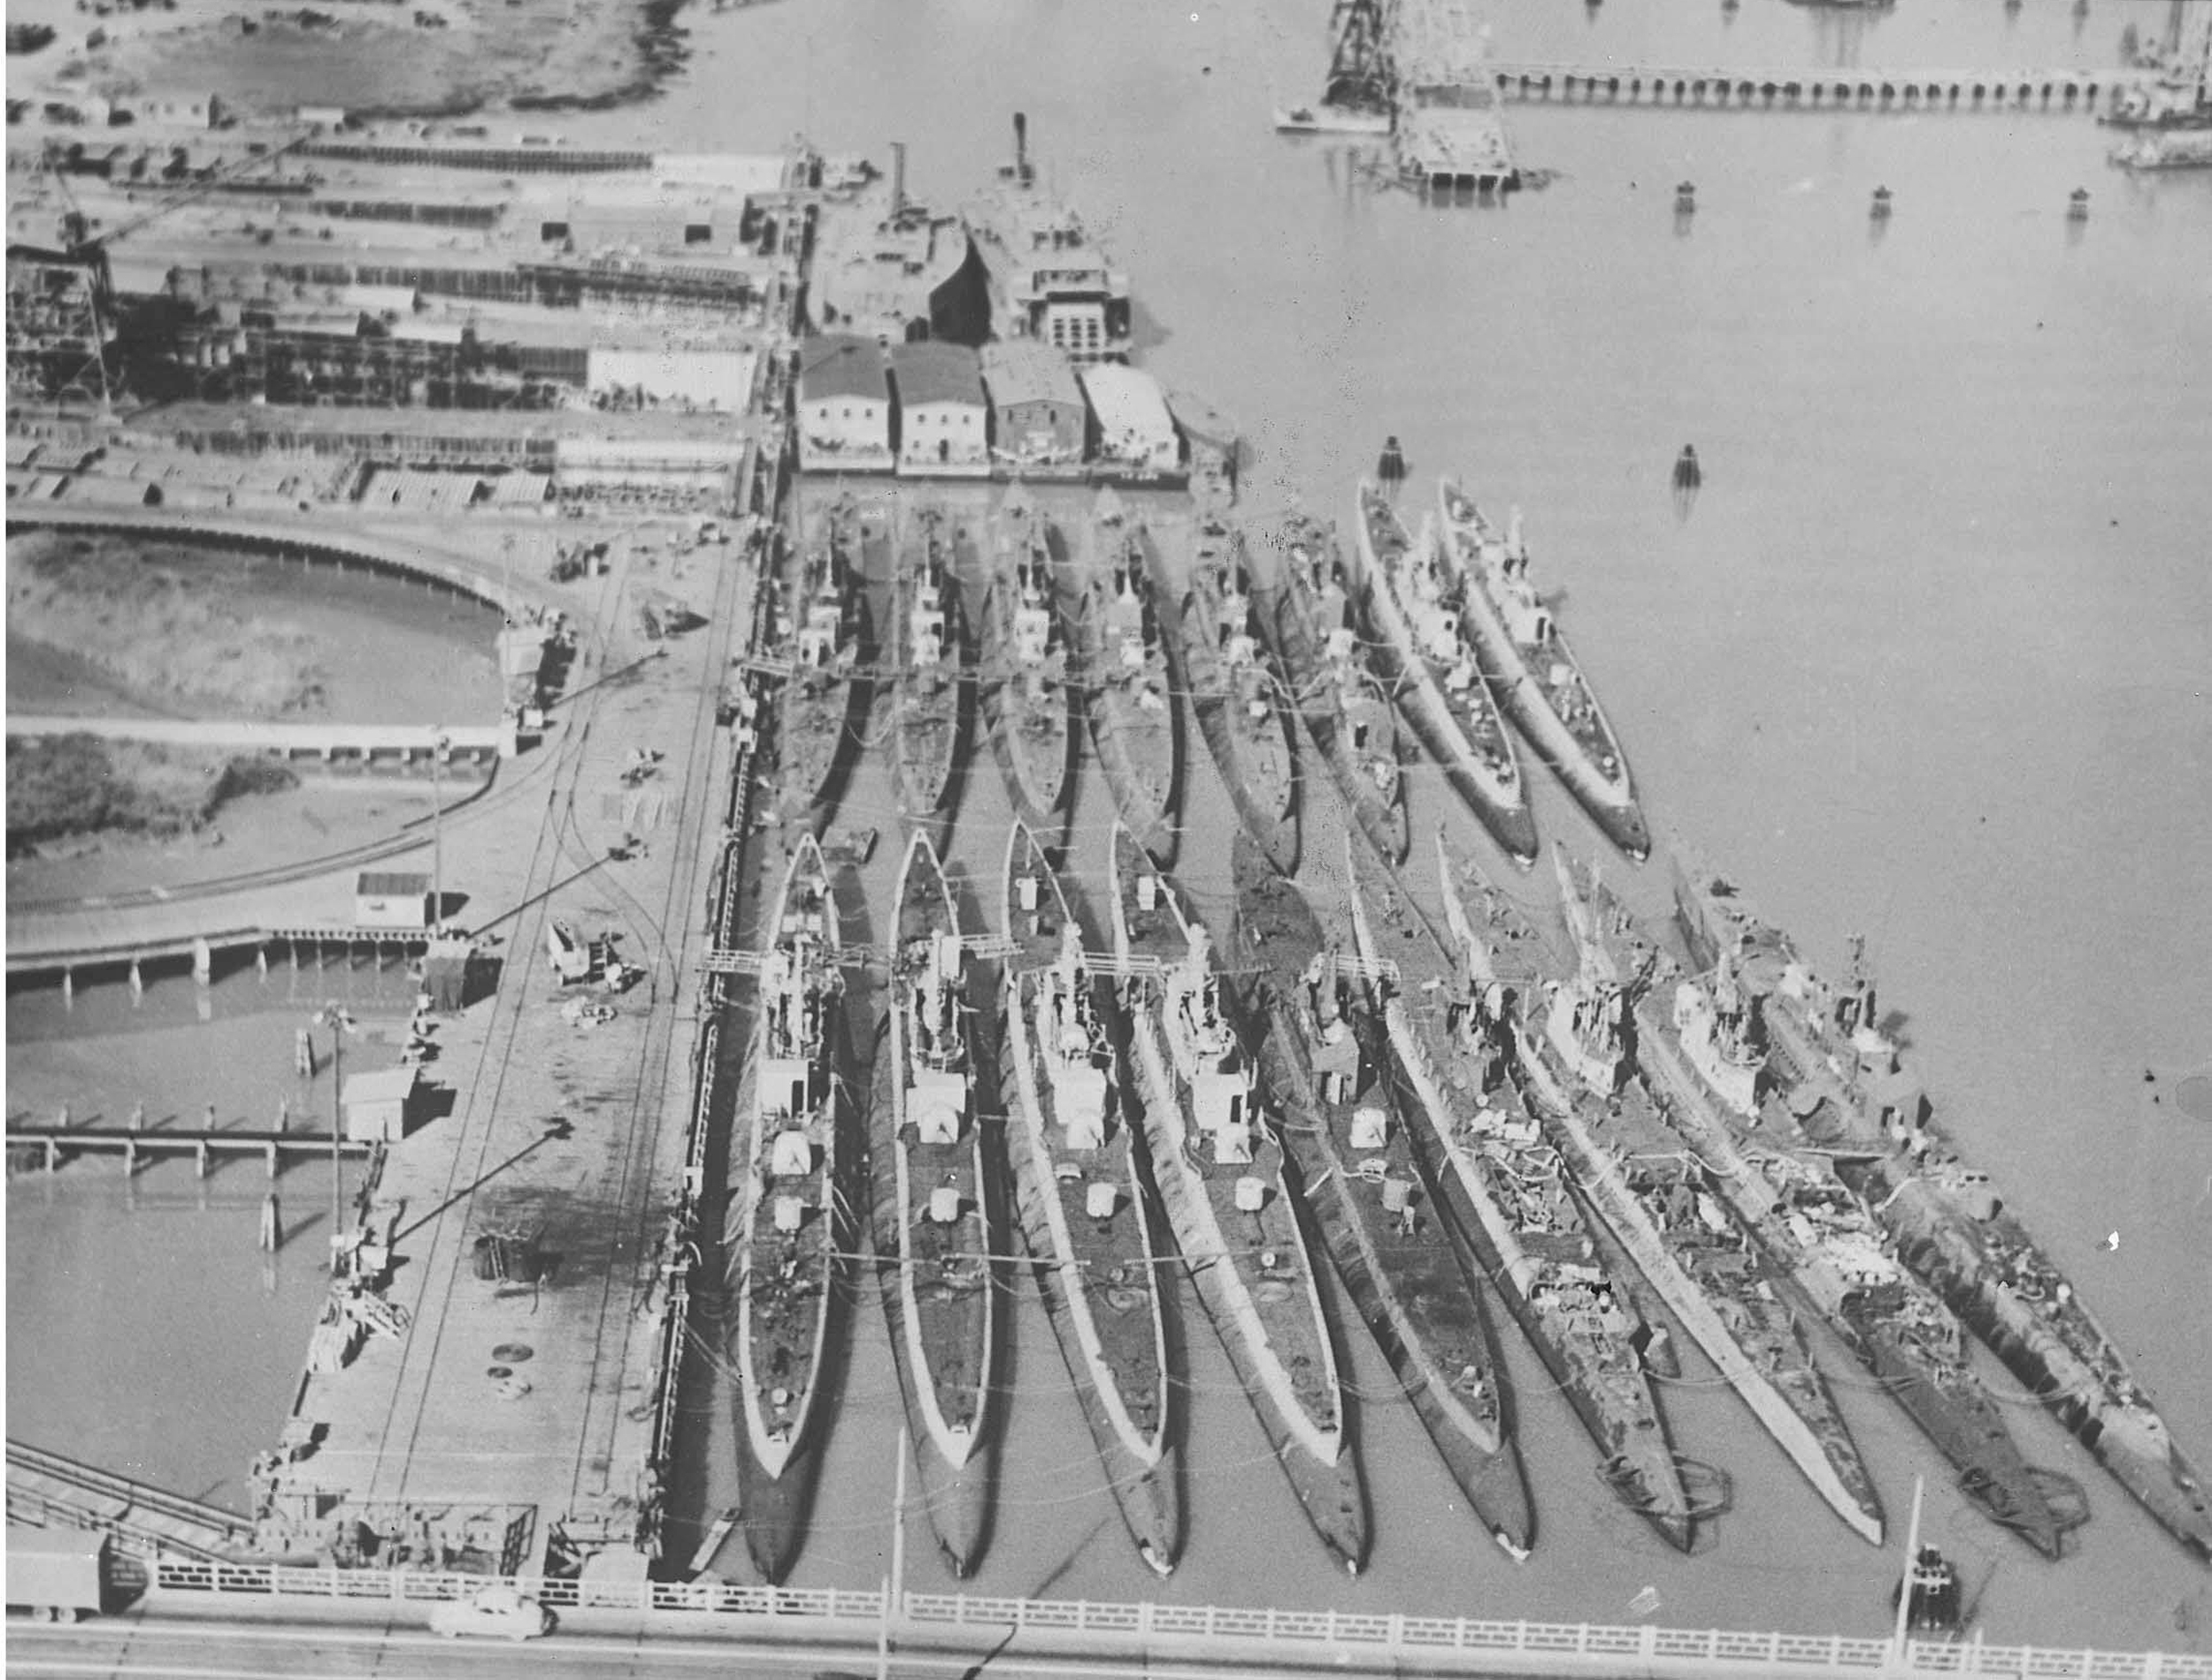 Inactivated submarines at Mare Island Naval Shipyard, California, United States, early 1946